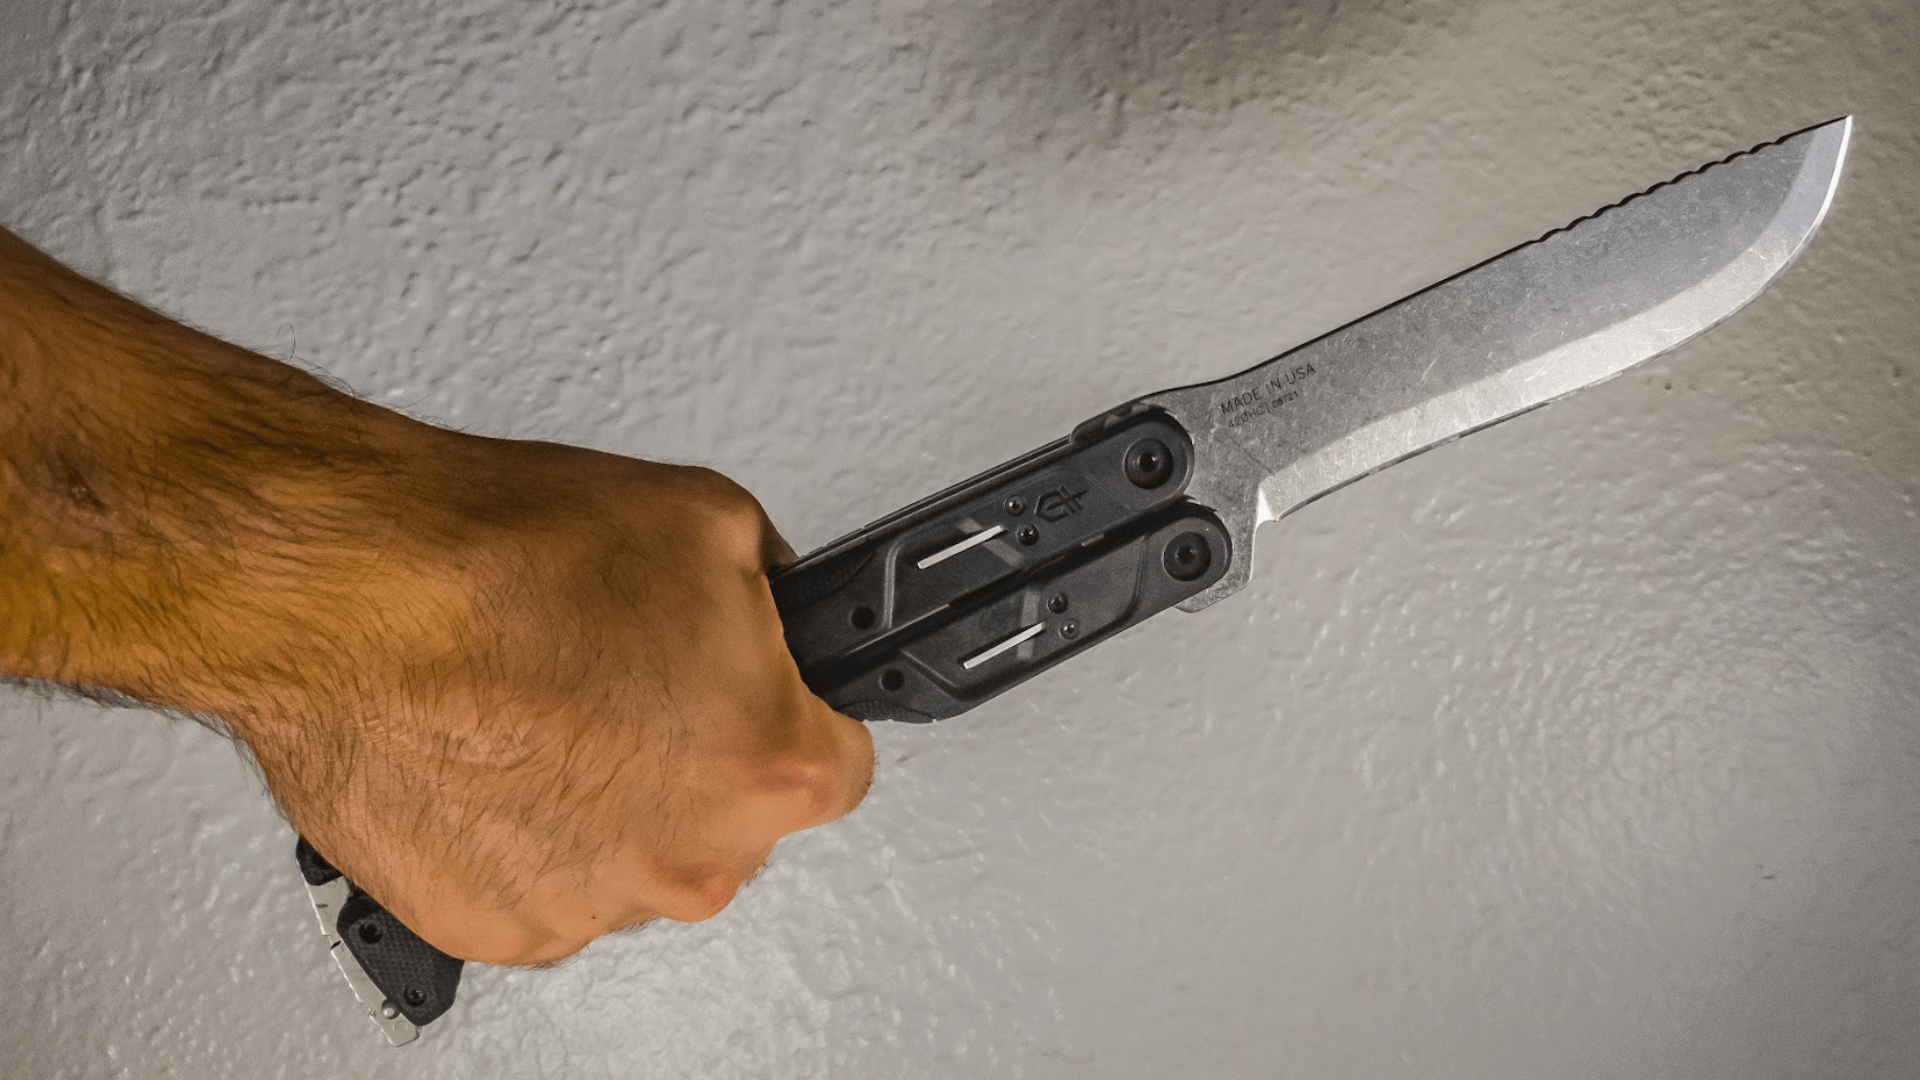 Review: the Gerber DoubleDown machete is a surprisingly practical giant butterfly knife